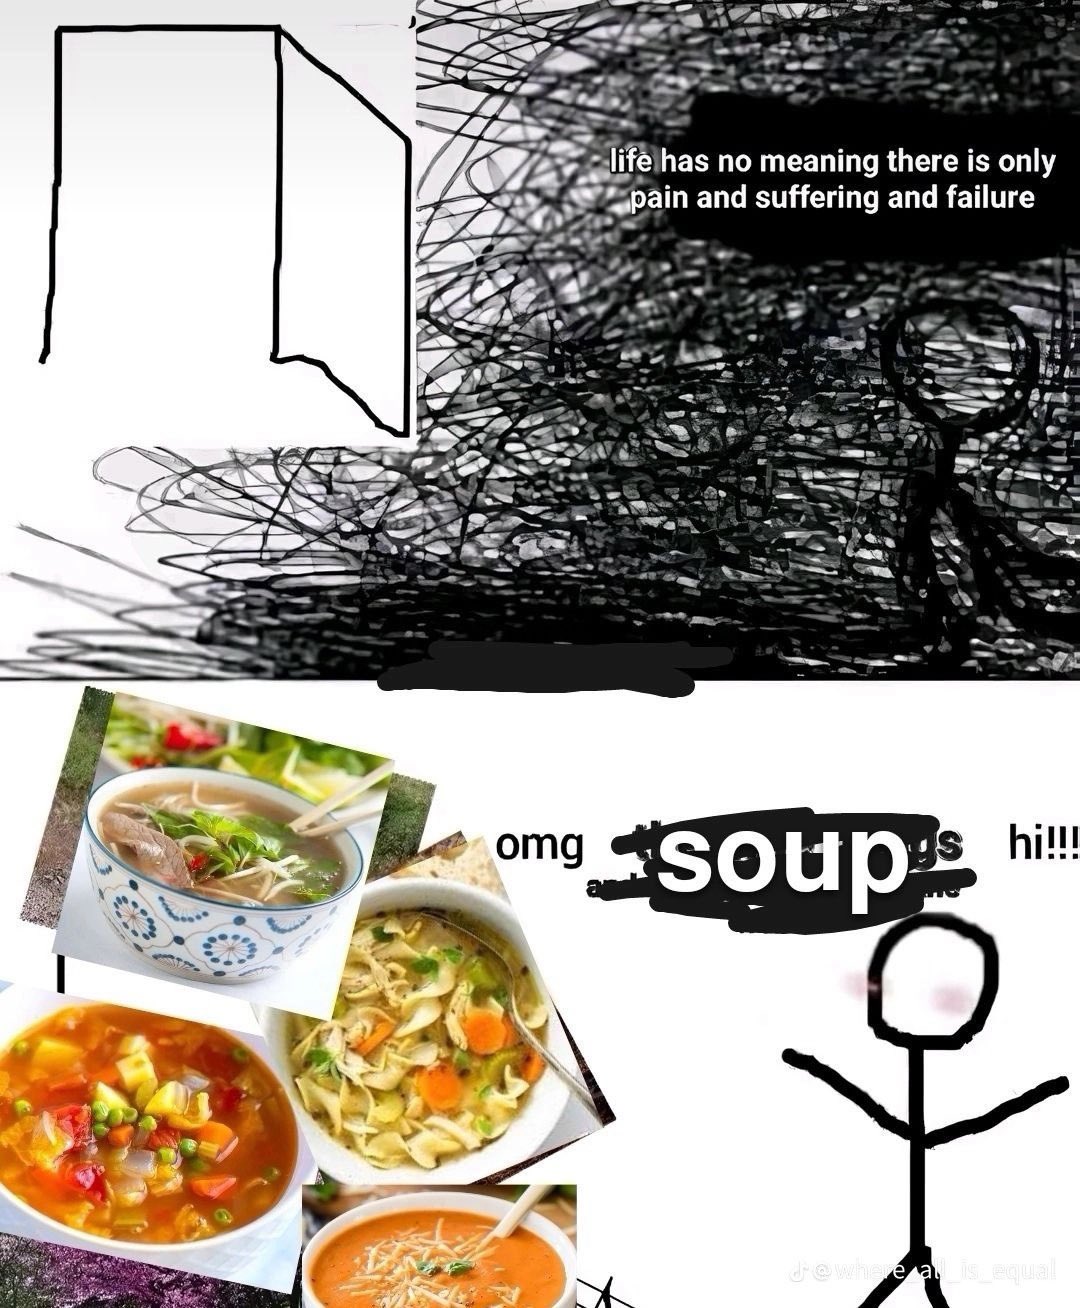 A two panel meme. A stick figure is hunched alone in their room, saying "life has no meaning there is only pain and suffering and failure." In the second panel, the stick figure is cured and excited by the appearance of various soups.